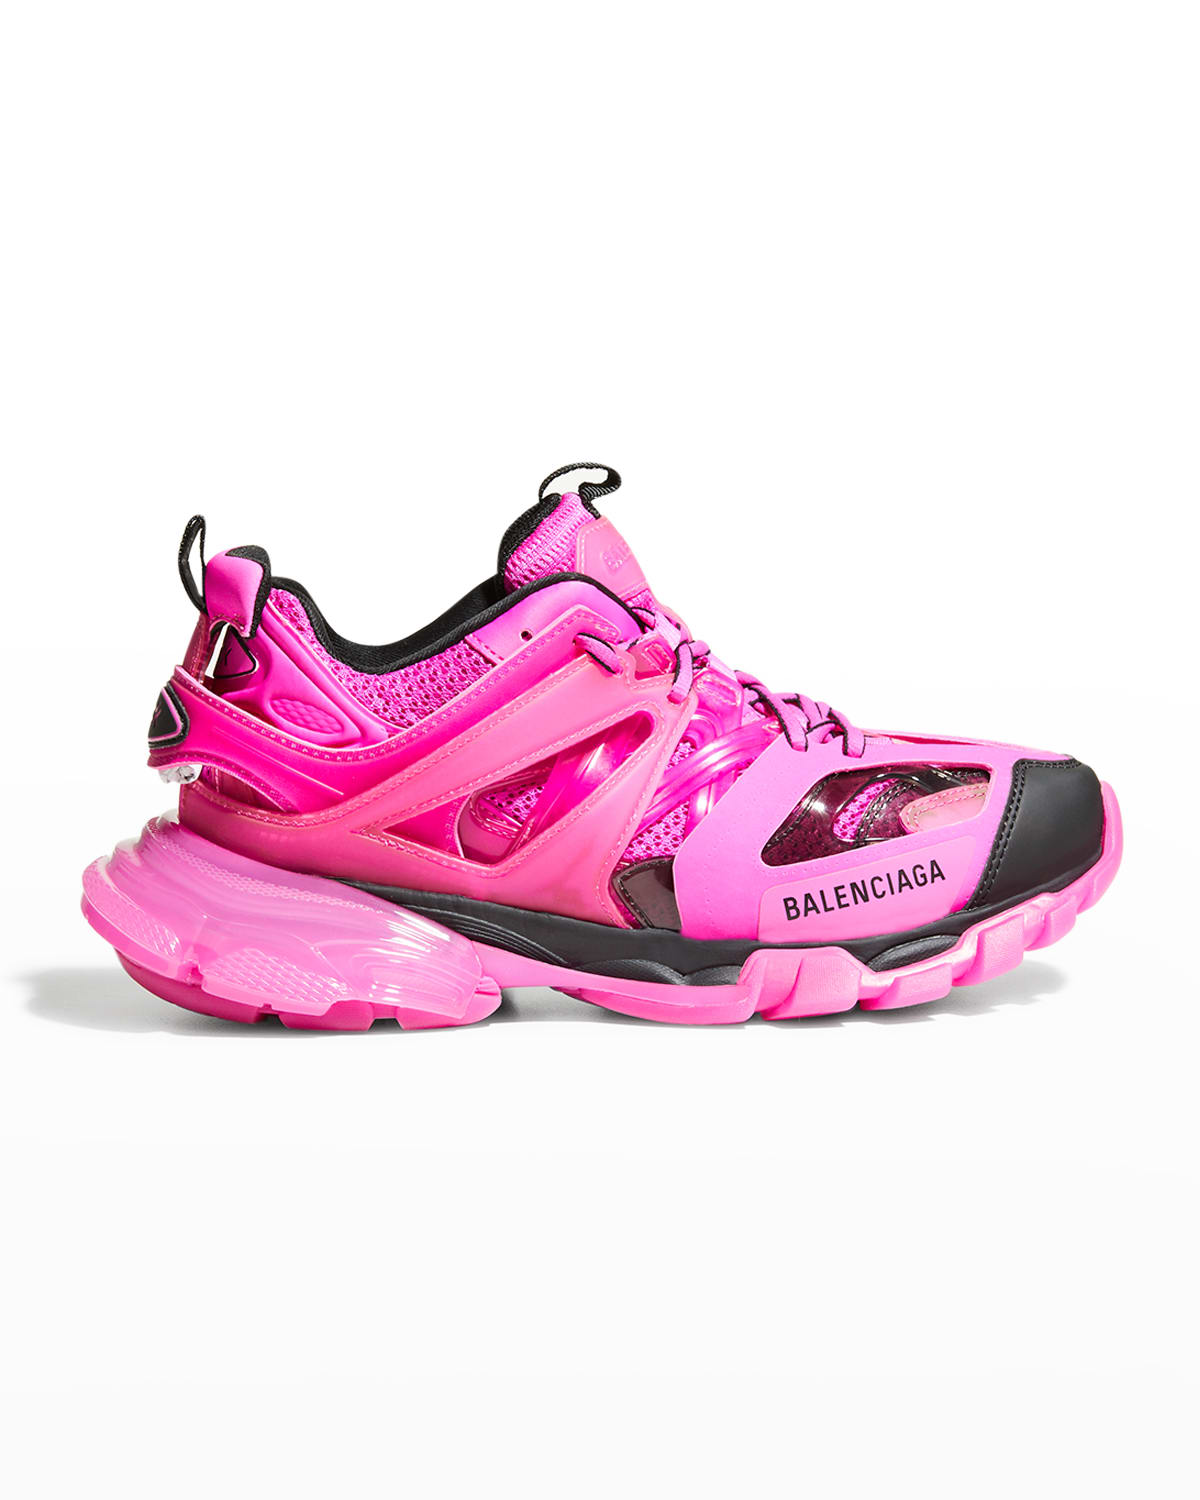 Track Clear-sole Trainer Sneakers In Dark Pink/black